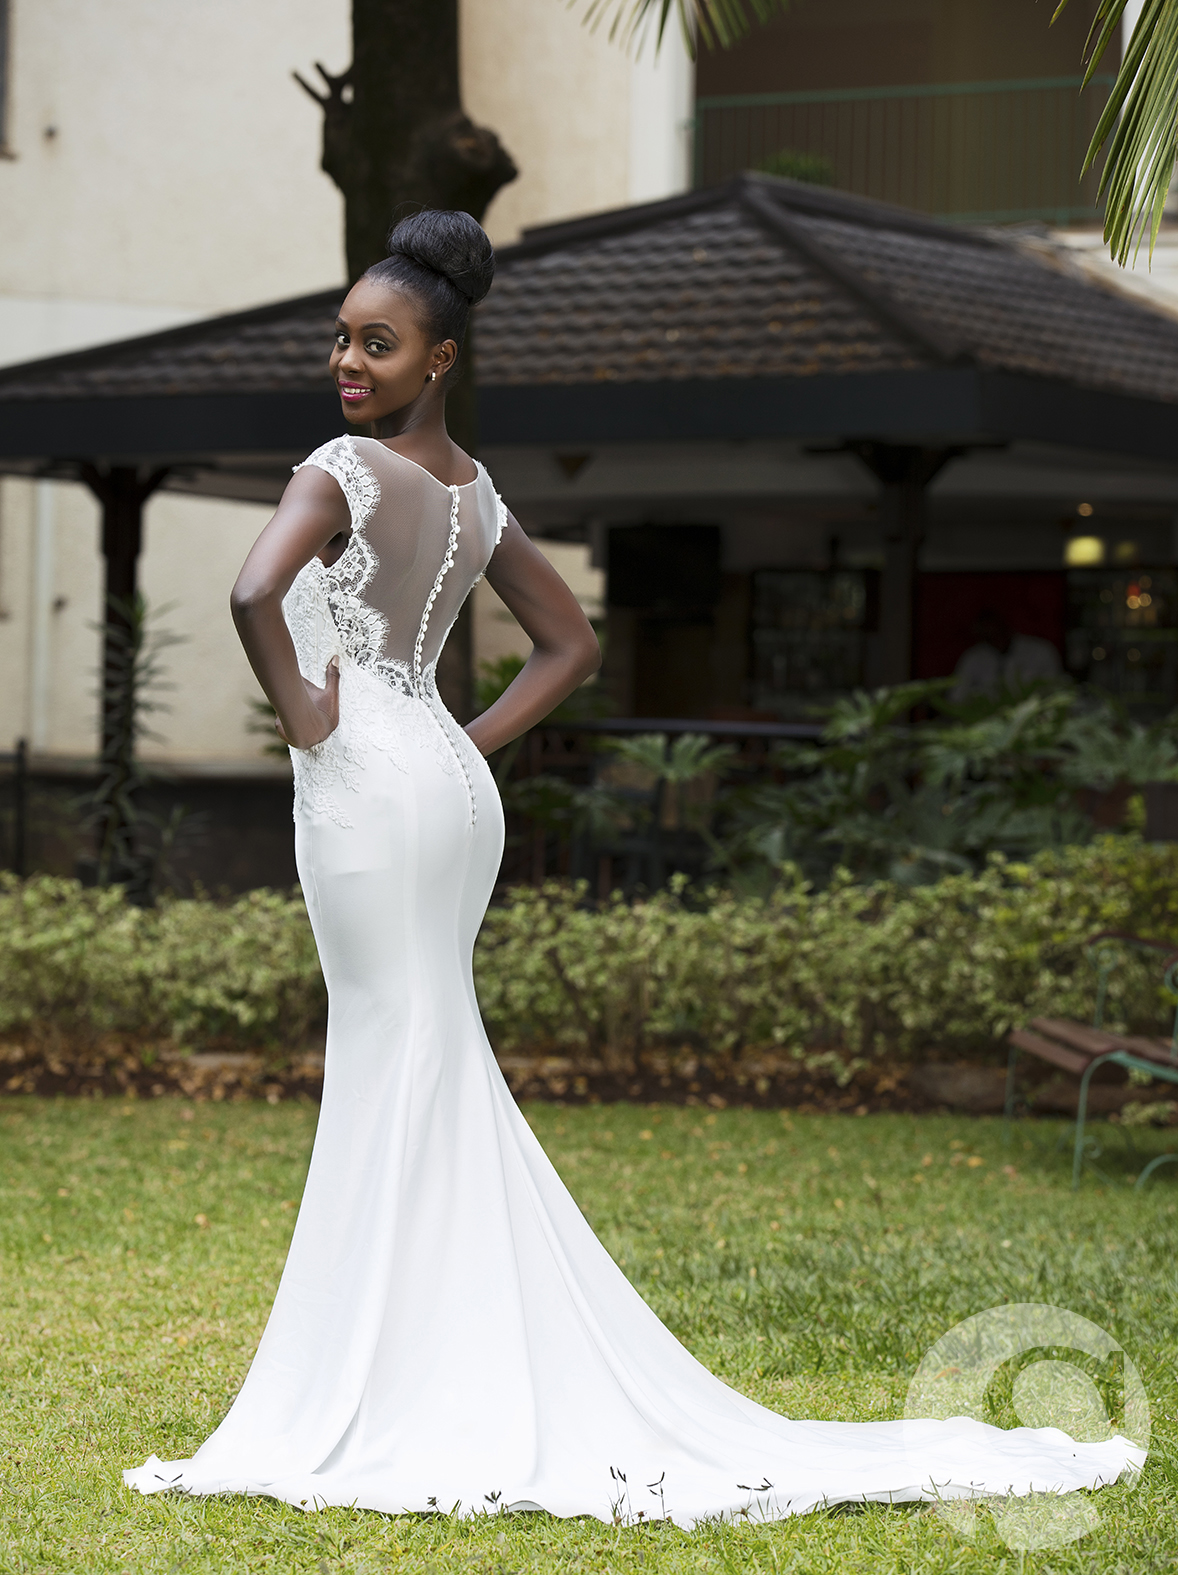 Sidai Brides - Only Designer Gown Brand in Kenya | Designer gowns, Gowns,  Backless dress formal